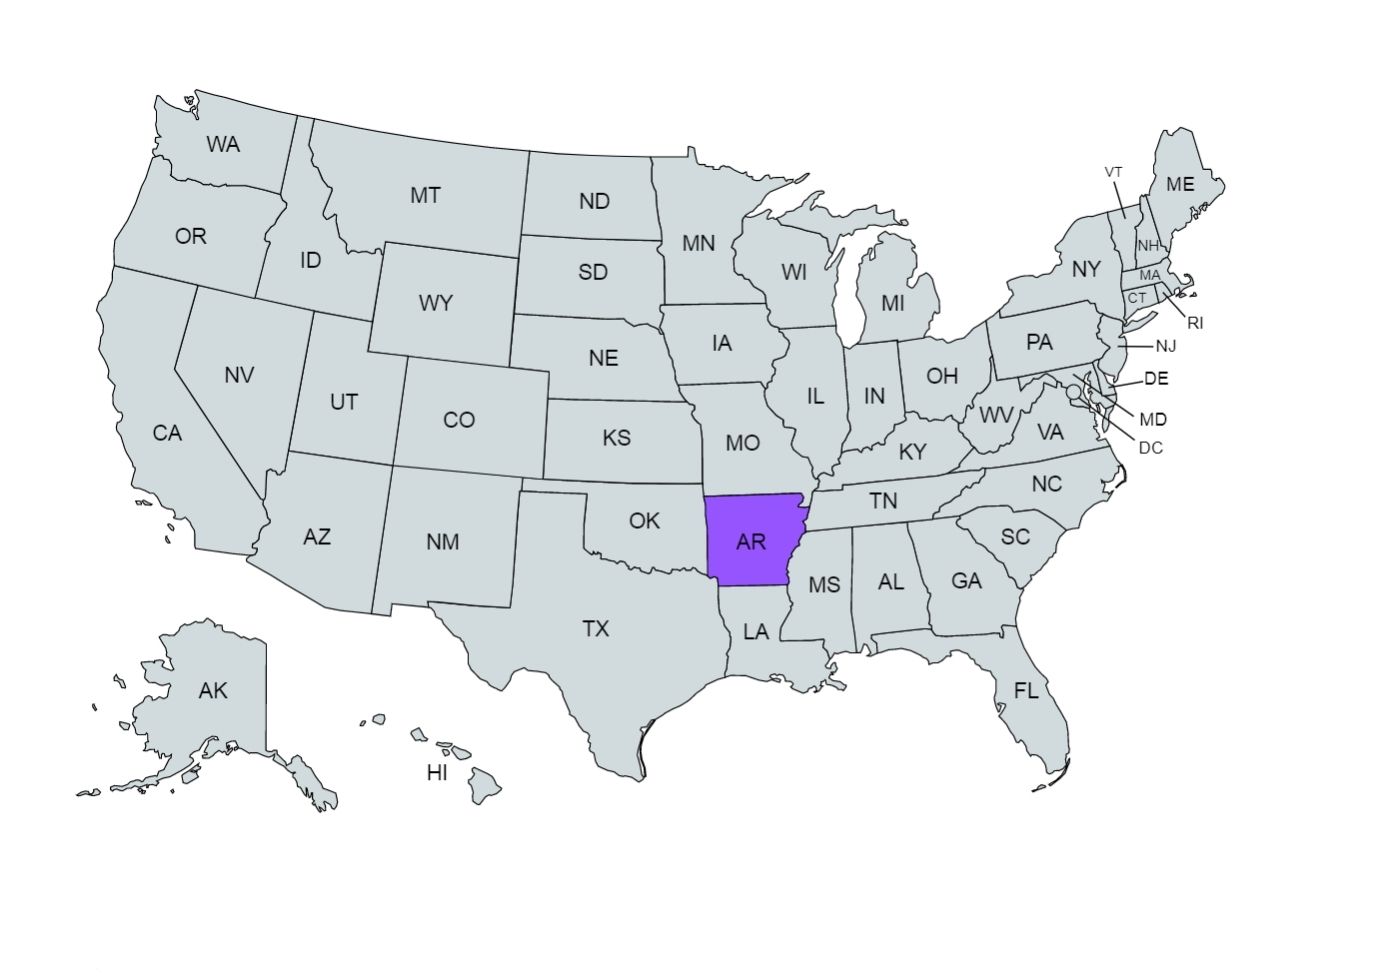 U.S.A. map with the Arkansas state marked in purple